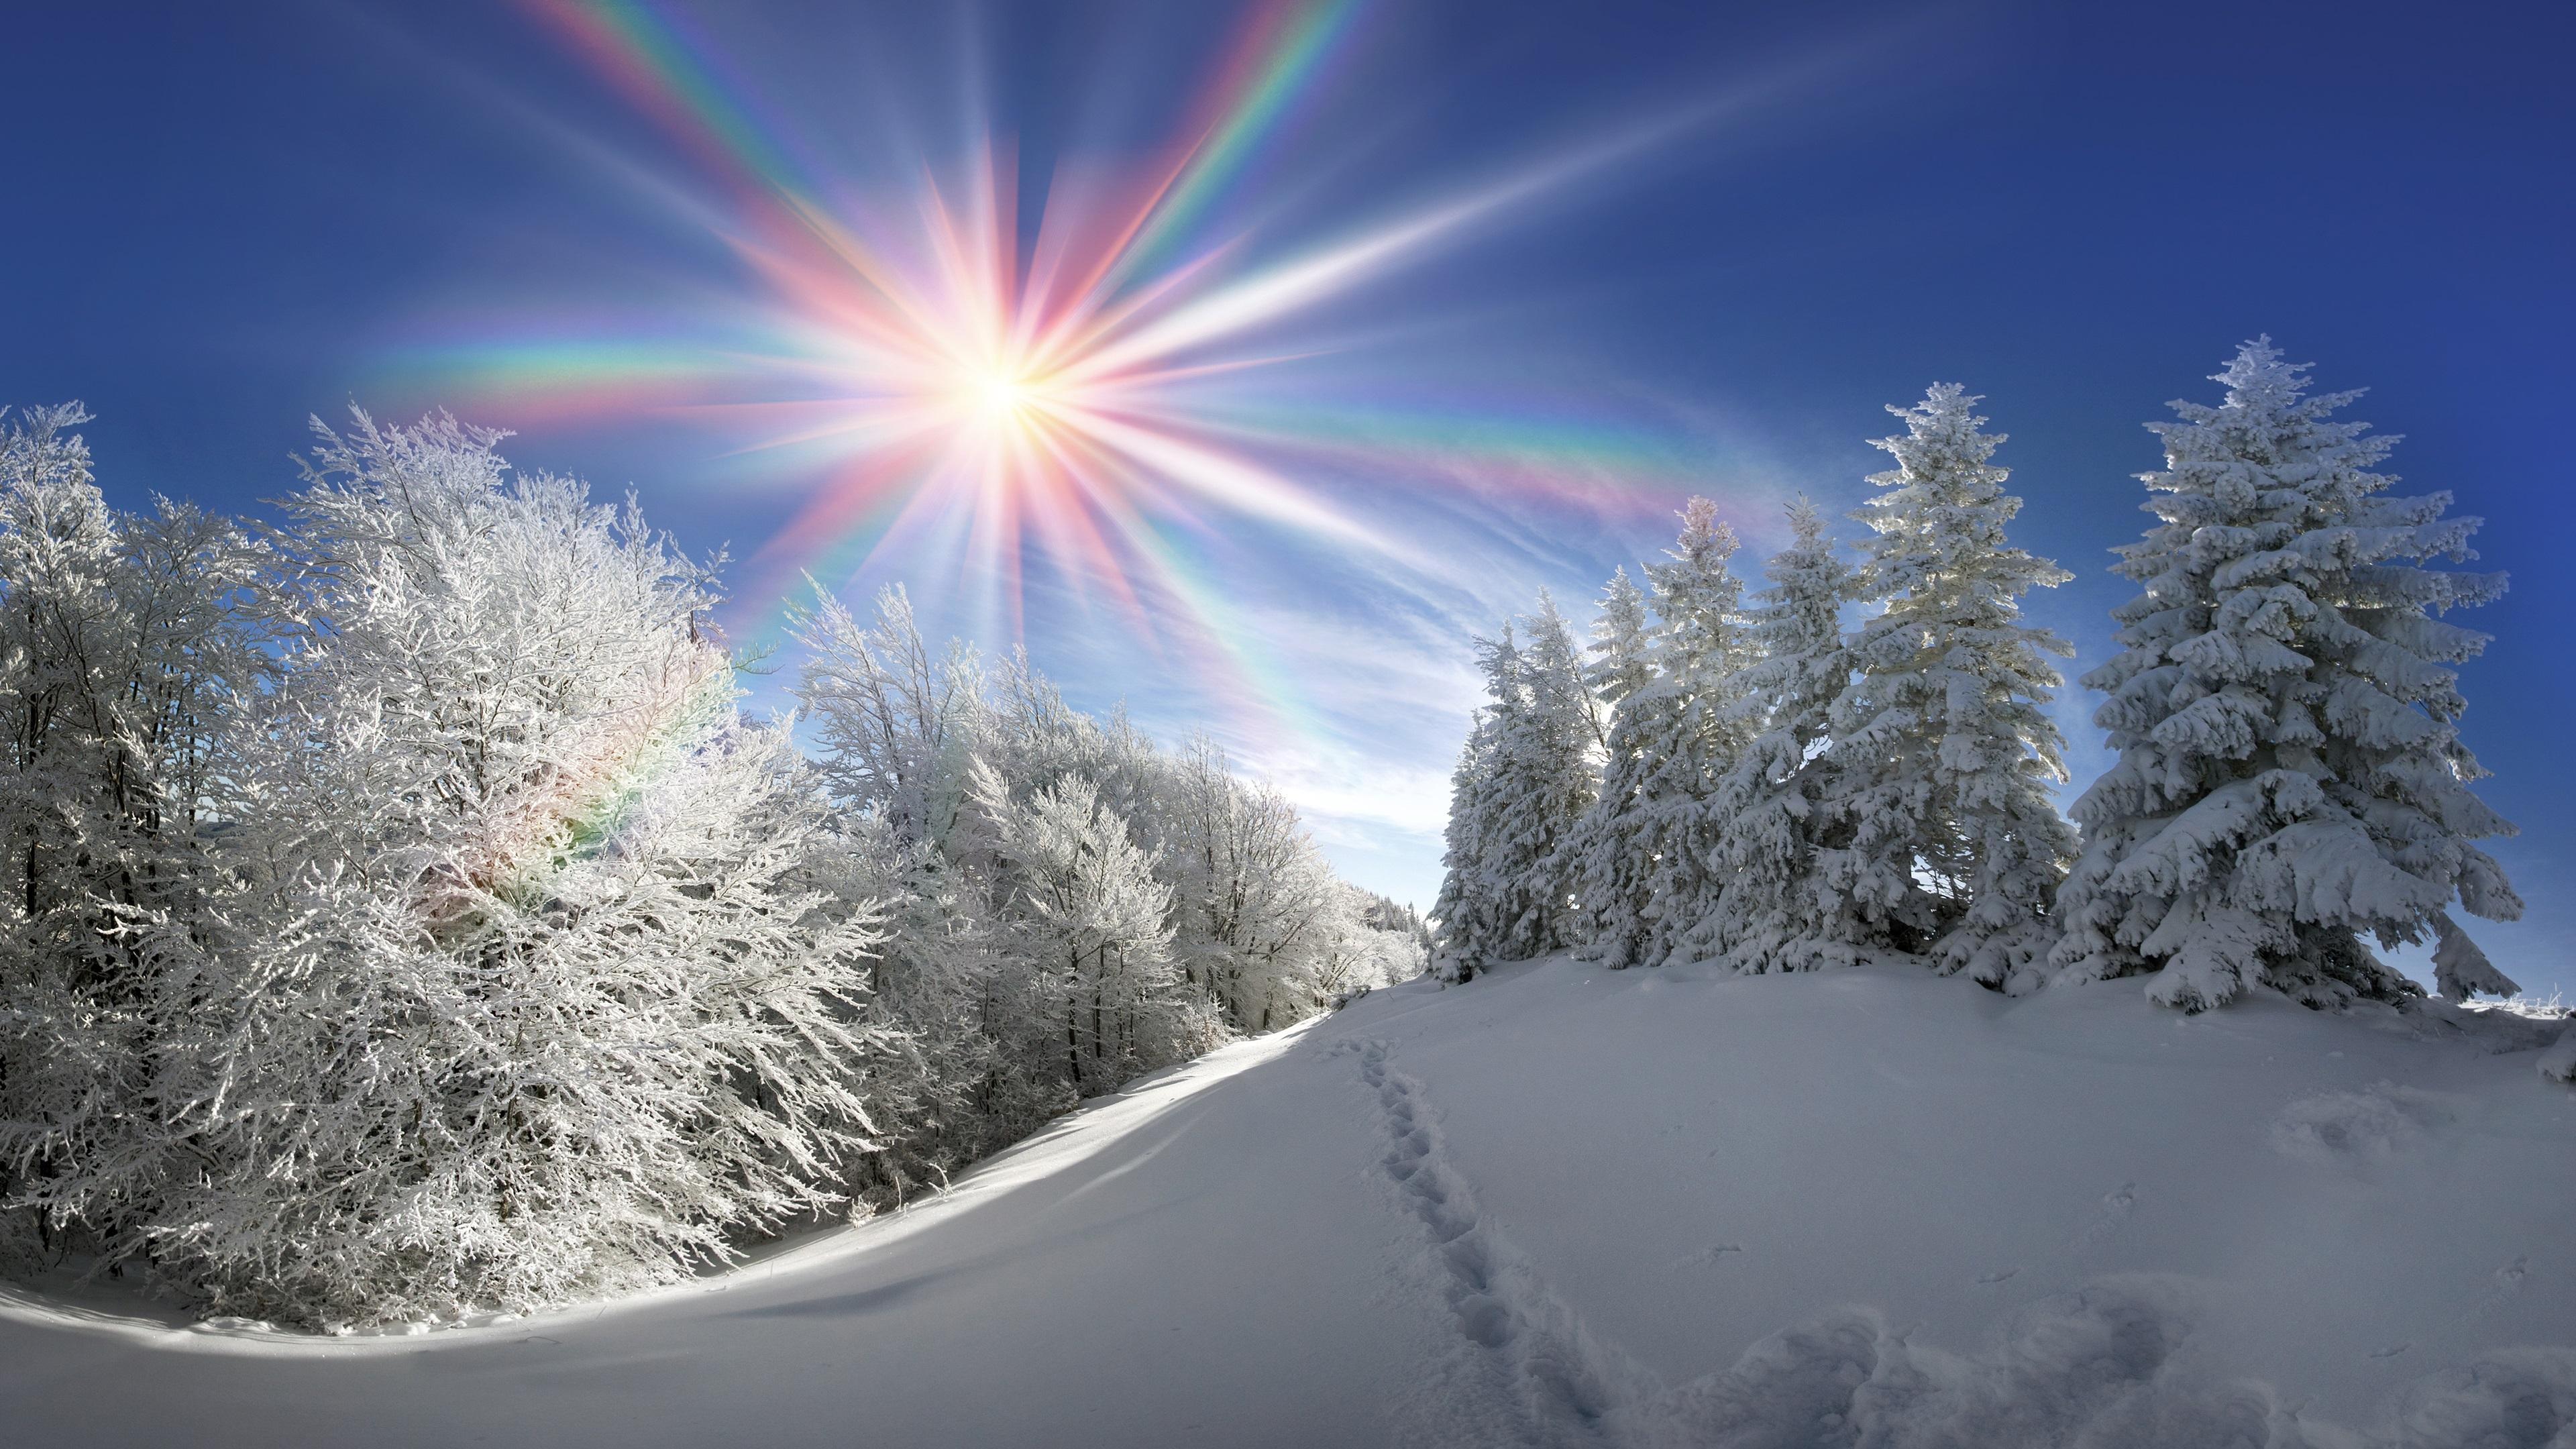 Wallpapers Winter, thick snow, trees, sun rays, rainbow colors 3840x2160 UHD 4K Picture, Image